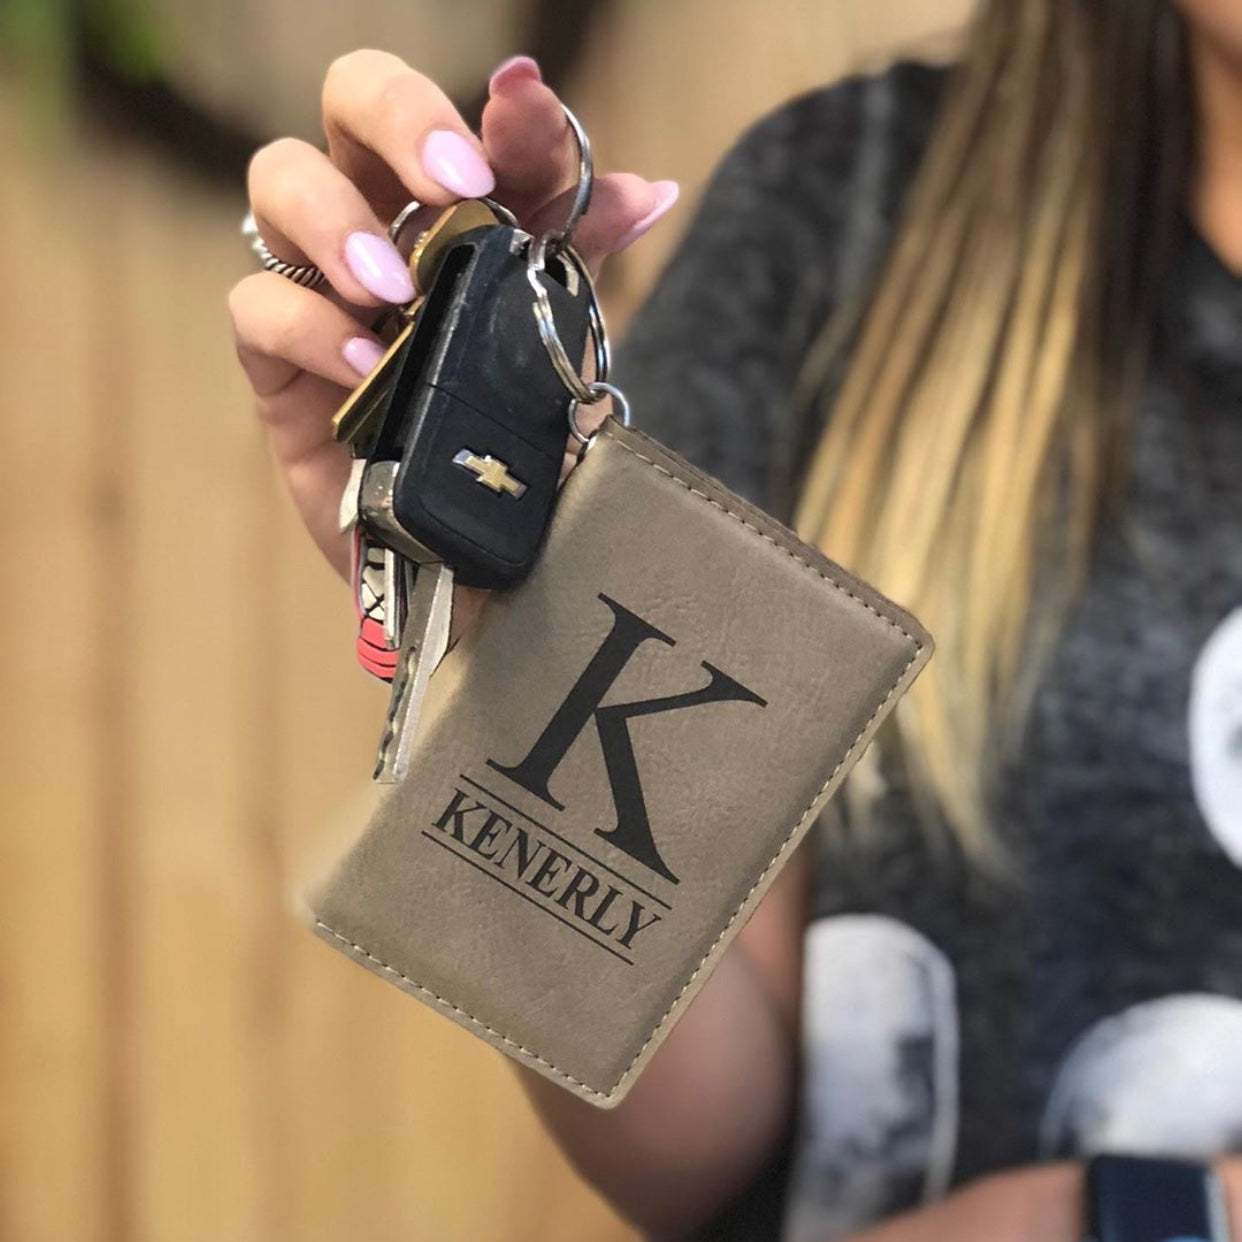 Personalized Keychain Wallet, Engraved ID Holder